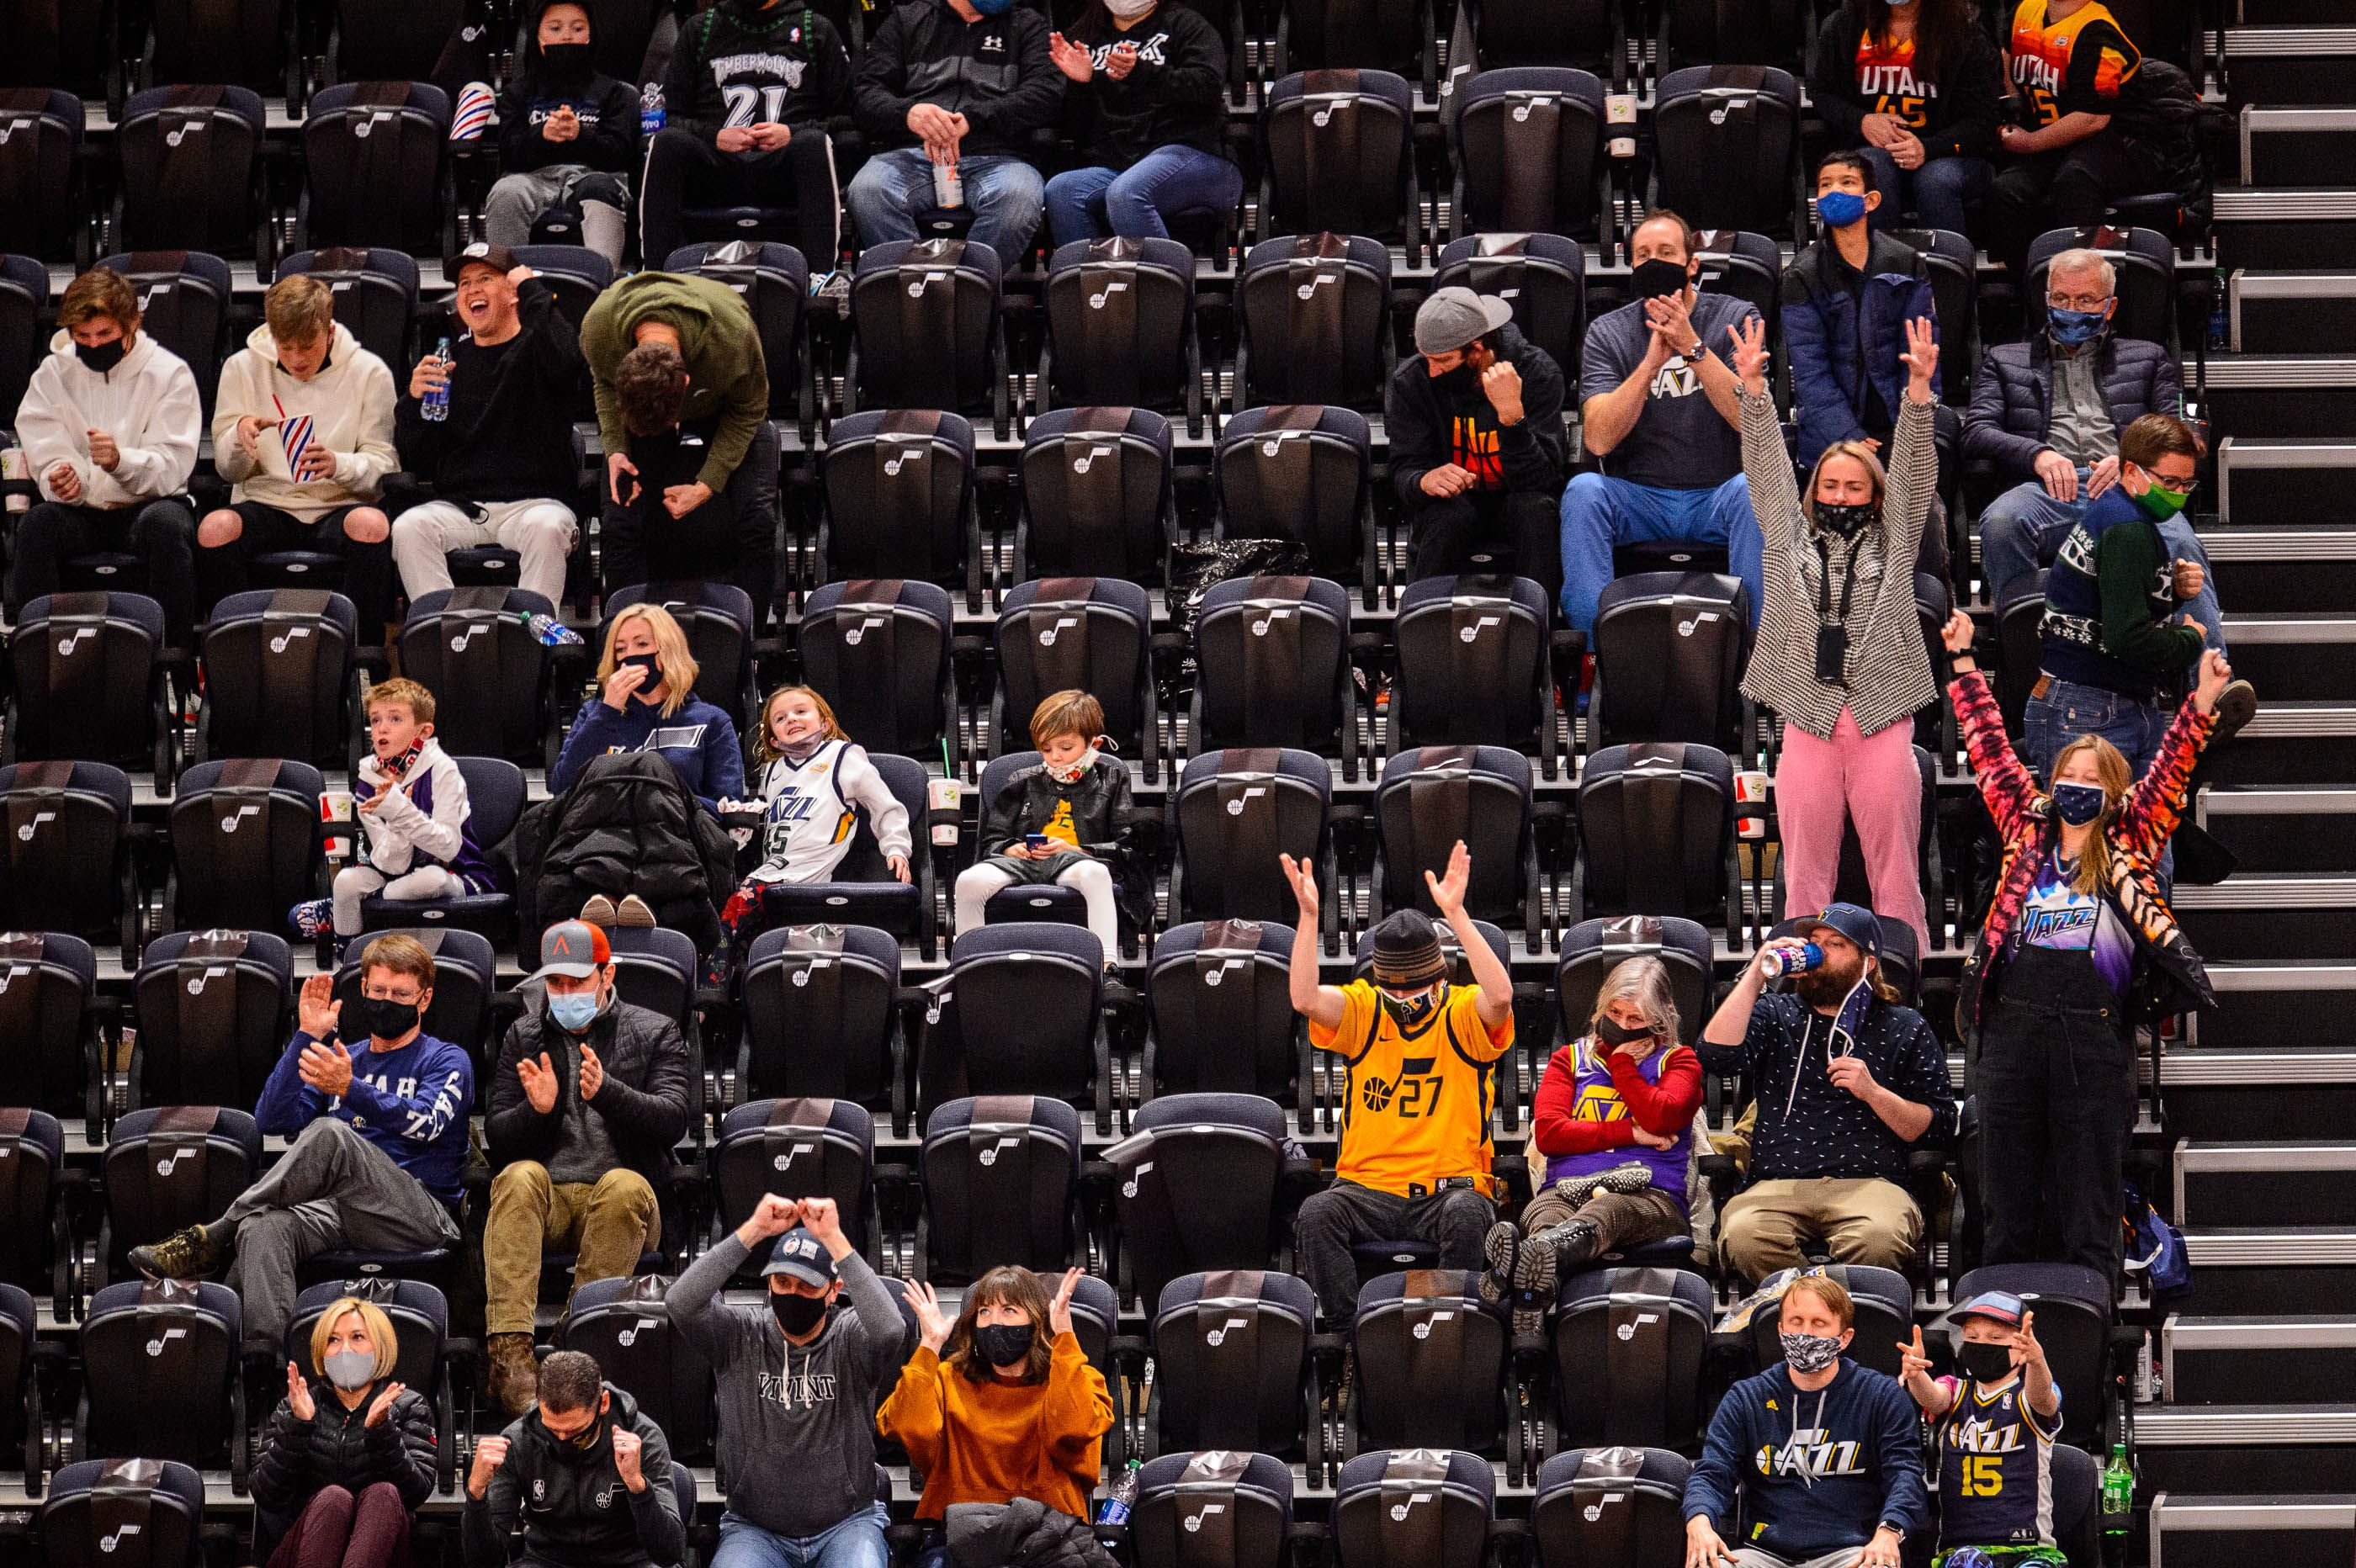 You can't stop living': Inside a Utah Jazz home game, during a pandemic,  with 1,500 fans